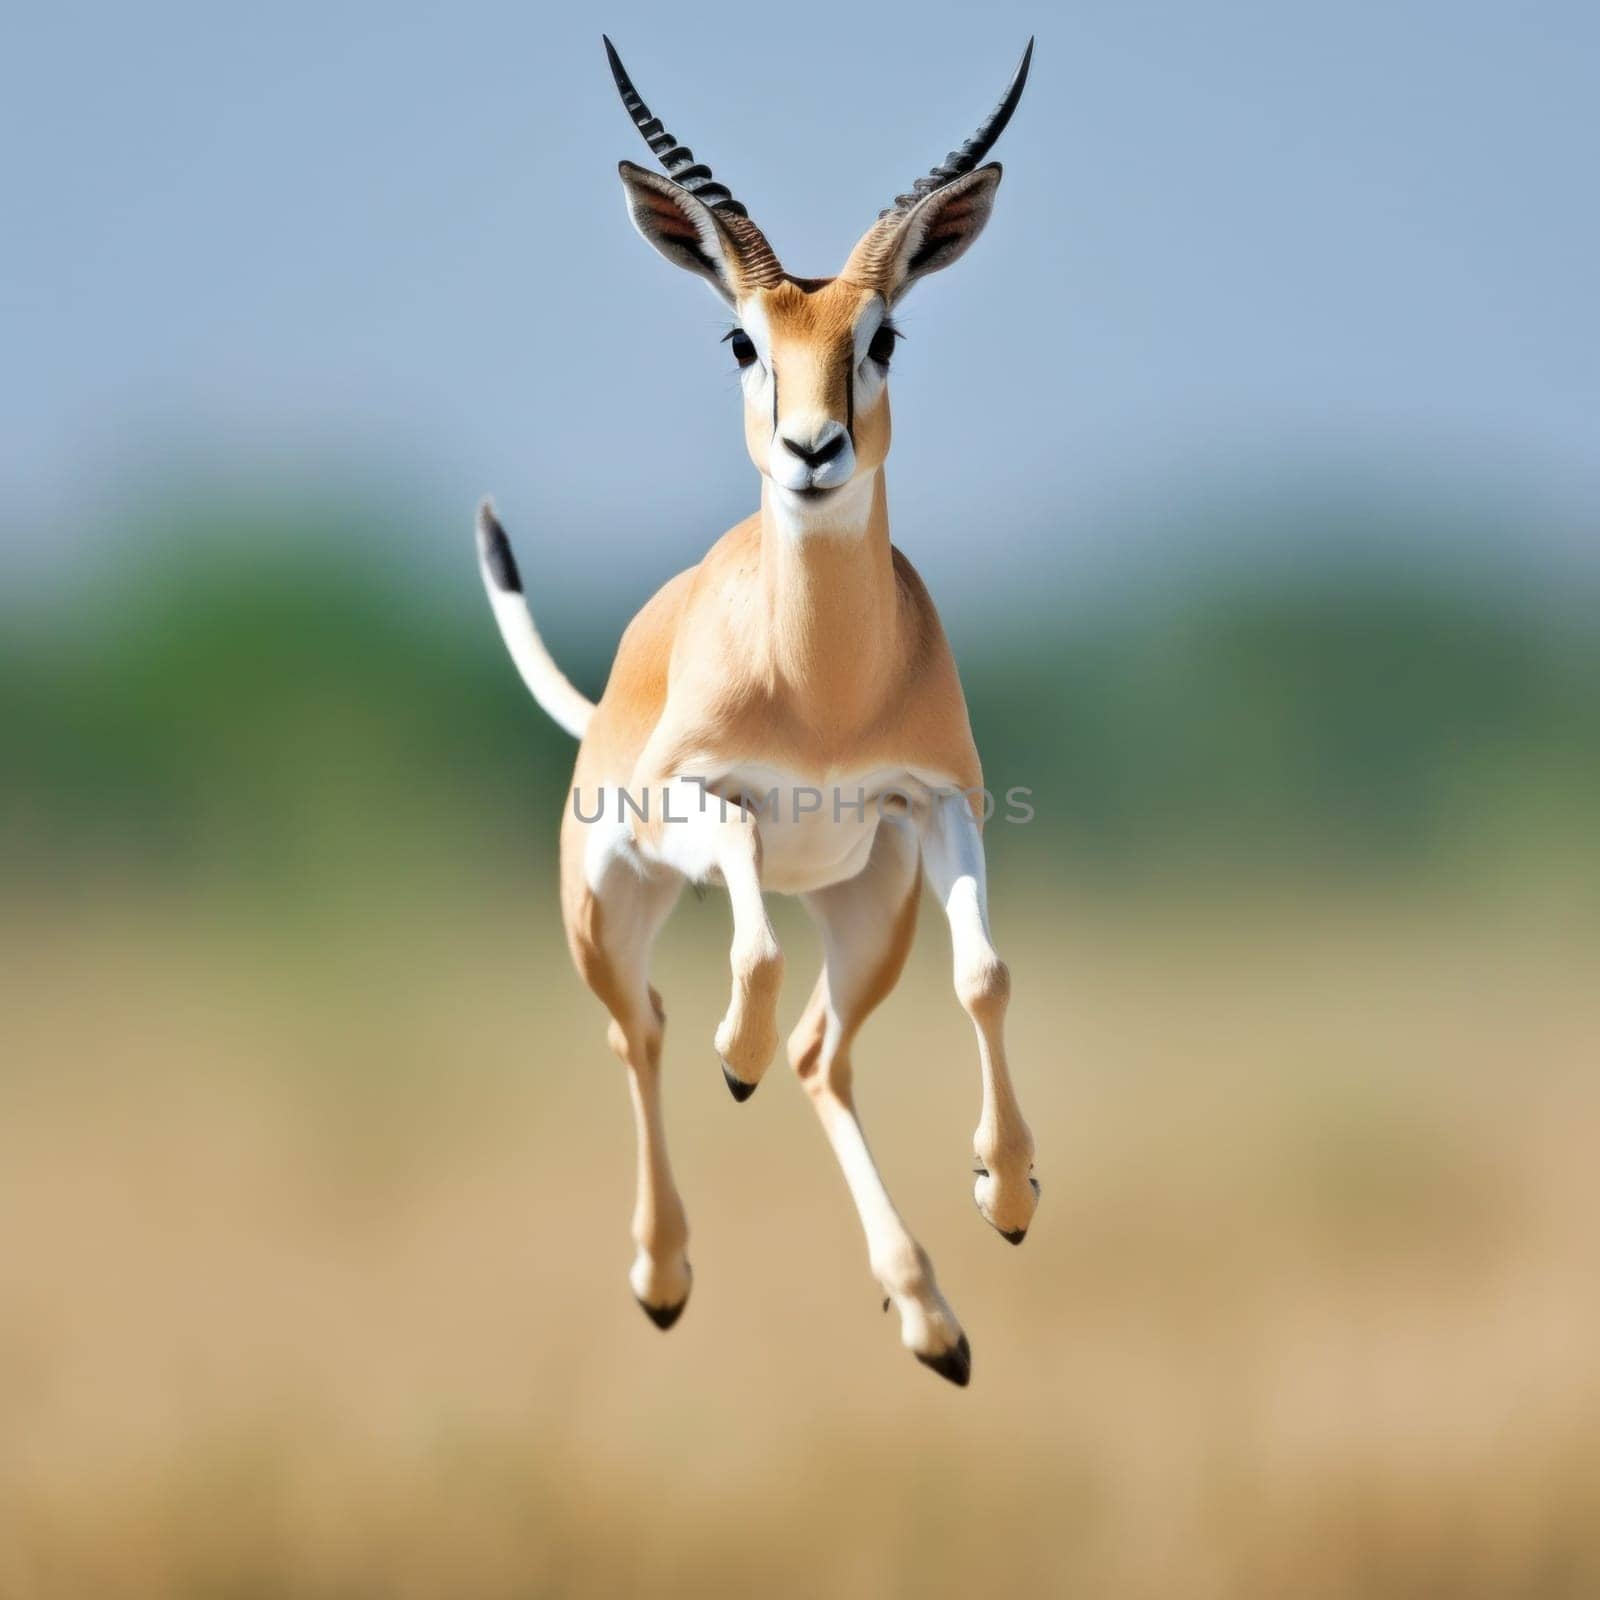 A gazelle leaping through the air in a grassy field, AI by starush